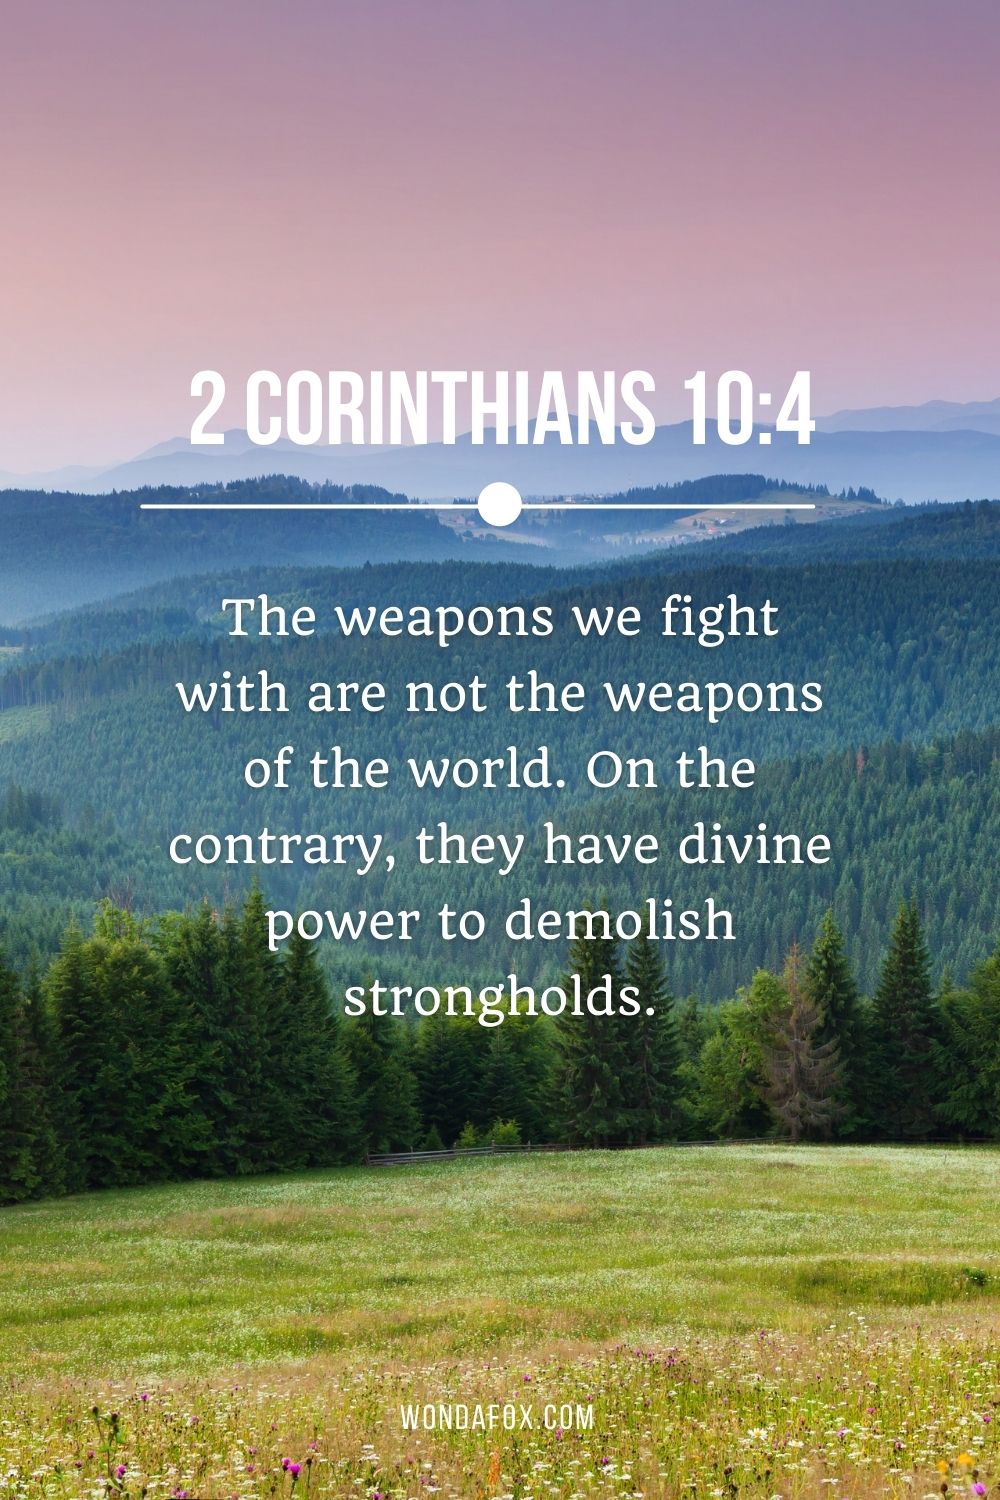 The weapons we fight with are not the weapons of the world. On the contrary, they have divine power to demolish strongholds.